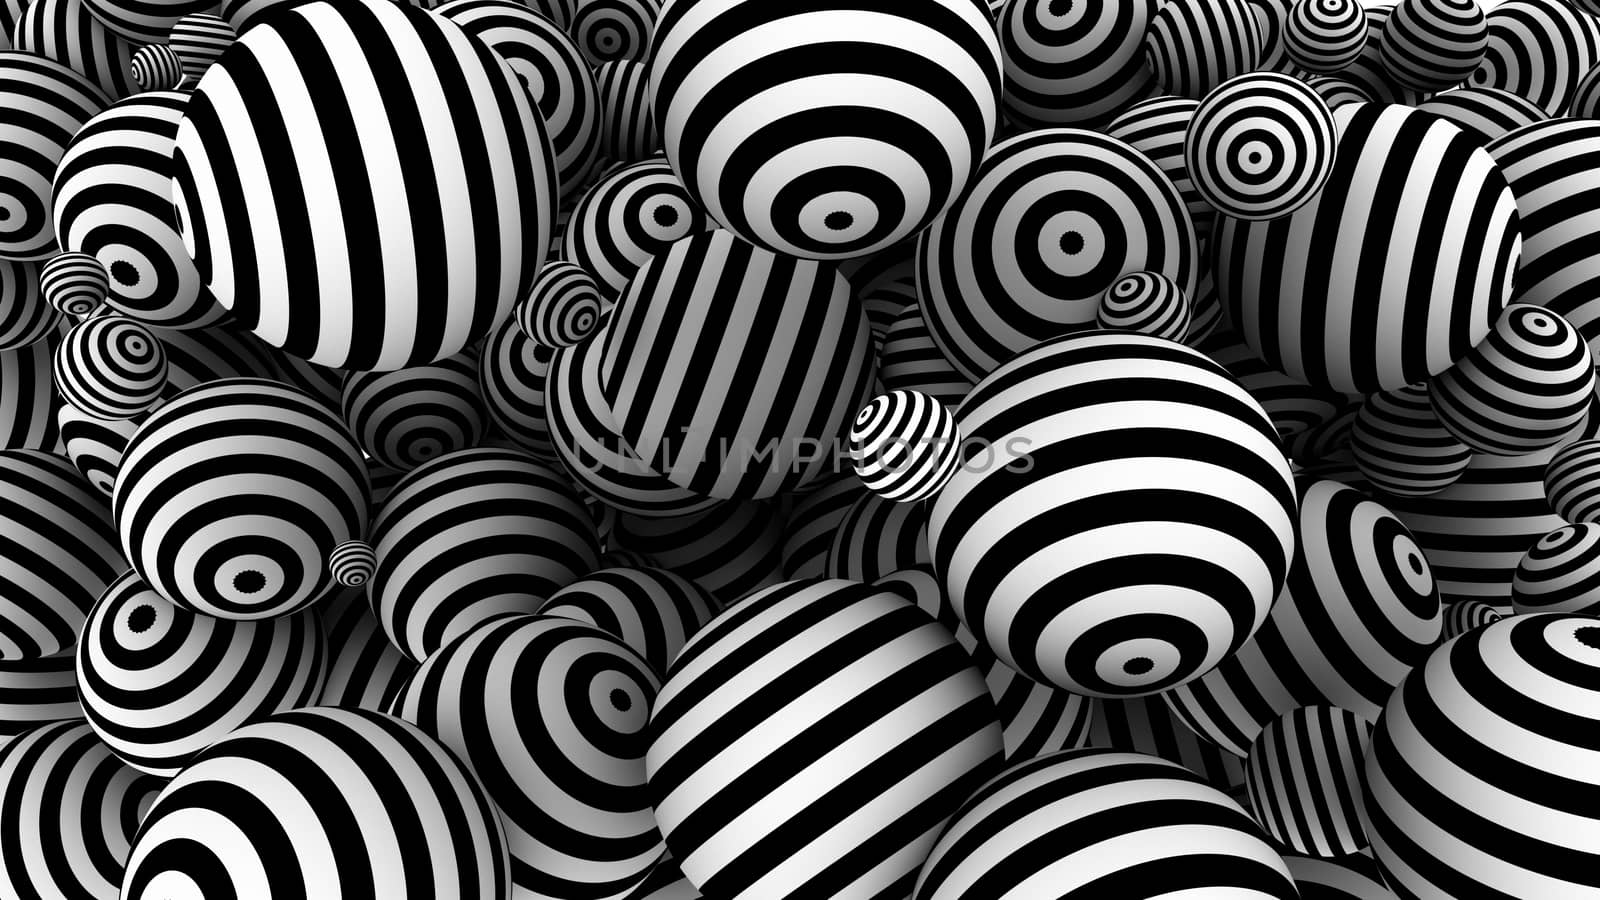 Illusive black and white 3d spheres by klss